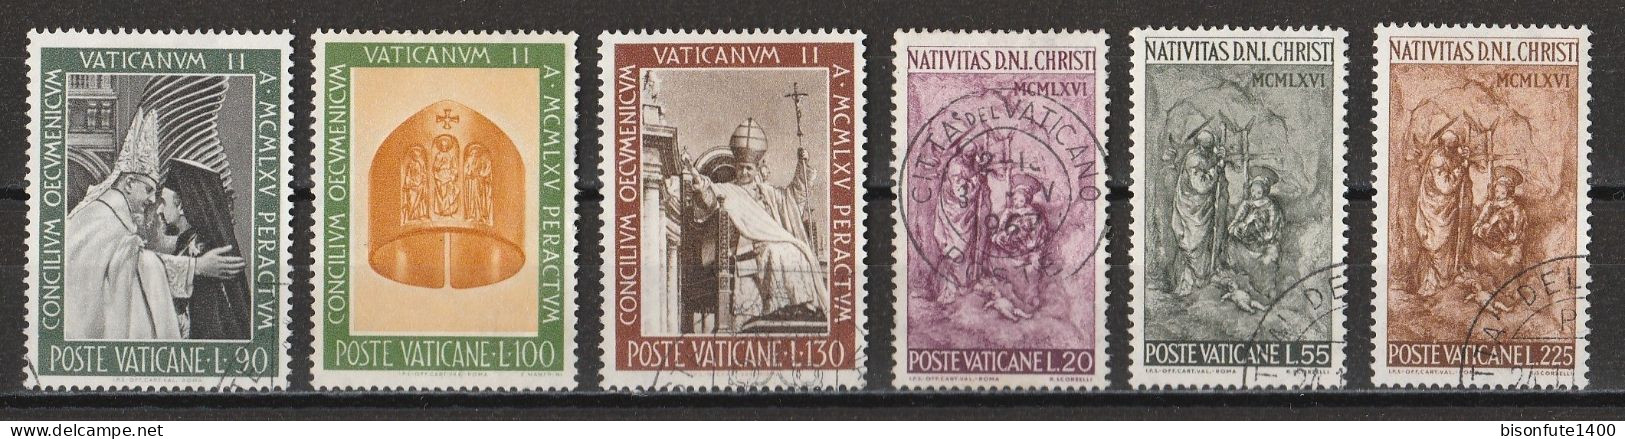 Vatican 1966 : Timbres Yvert & Tellier N° 451 - 452 - 453 - 454 - 455 - 456 - 457 - 458 - 459 - 460 - 461 - 462 -....... - Usados